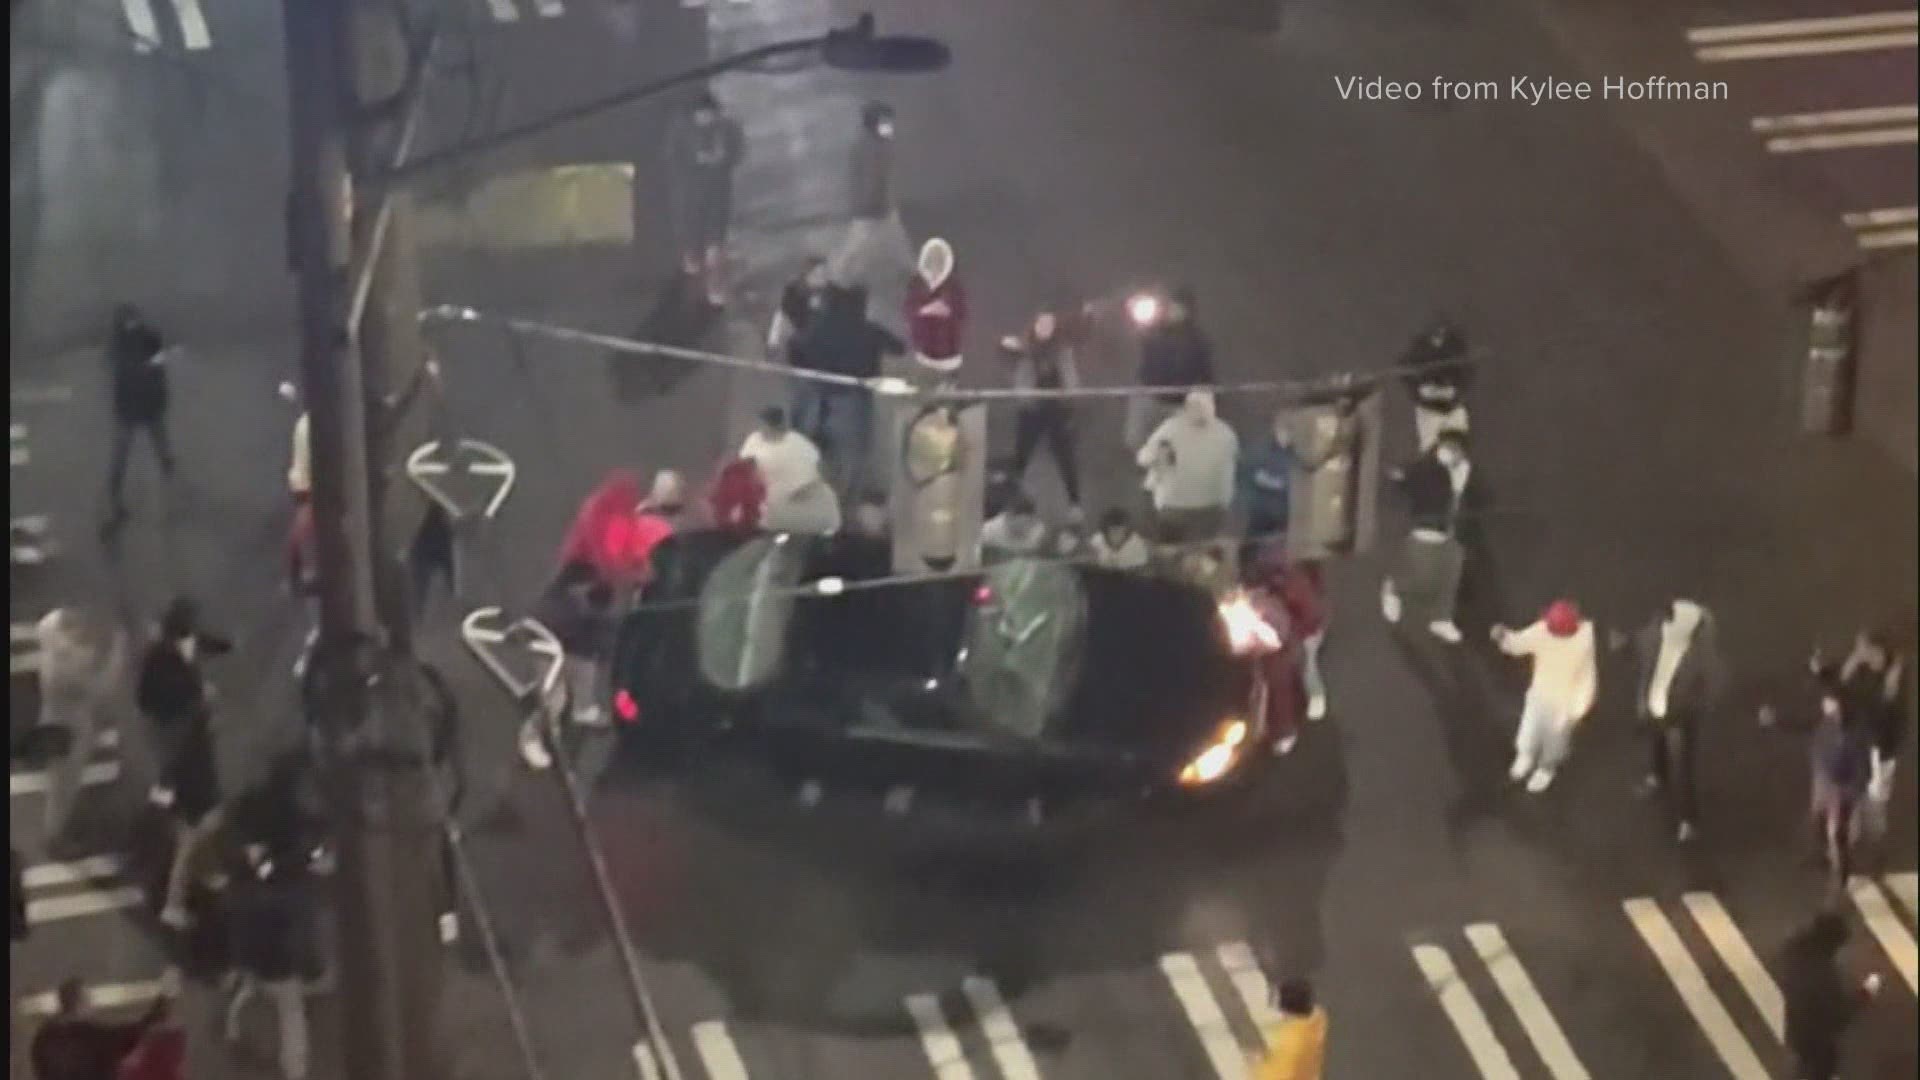 Video shared on social media and with KING 5 shows a large group of people in the University District flipping and destroying a car during a street racing event.